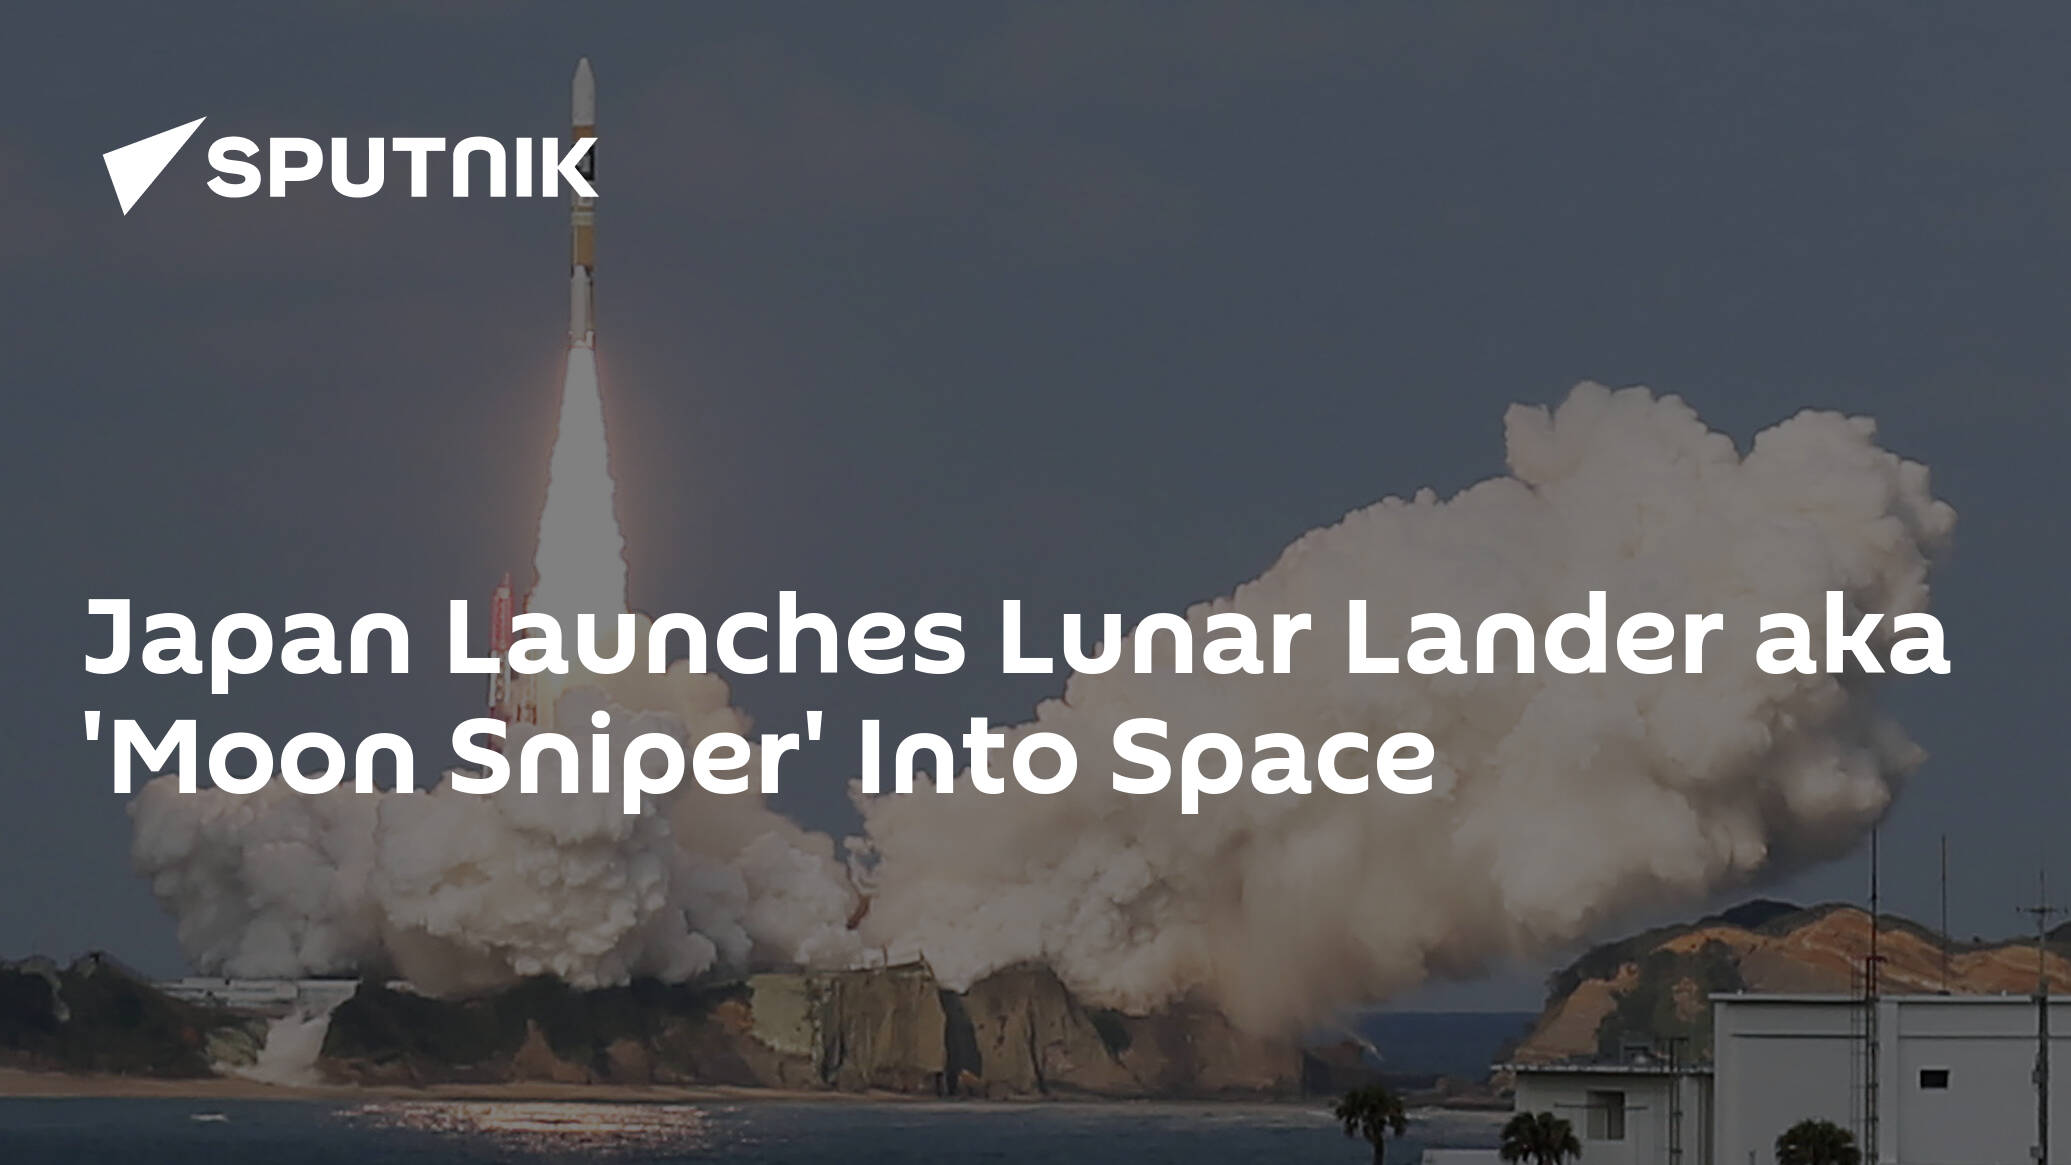 Japan Launches Lunar Lander aka 'Moon Sniper' into Space